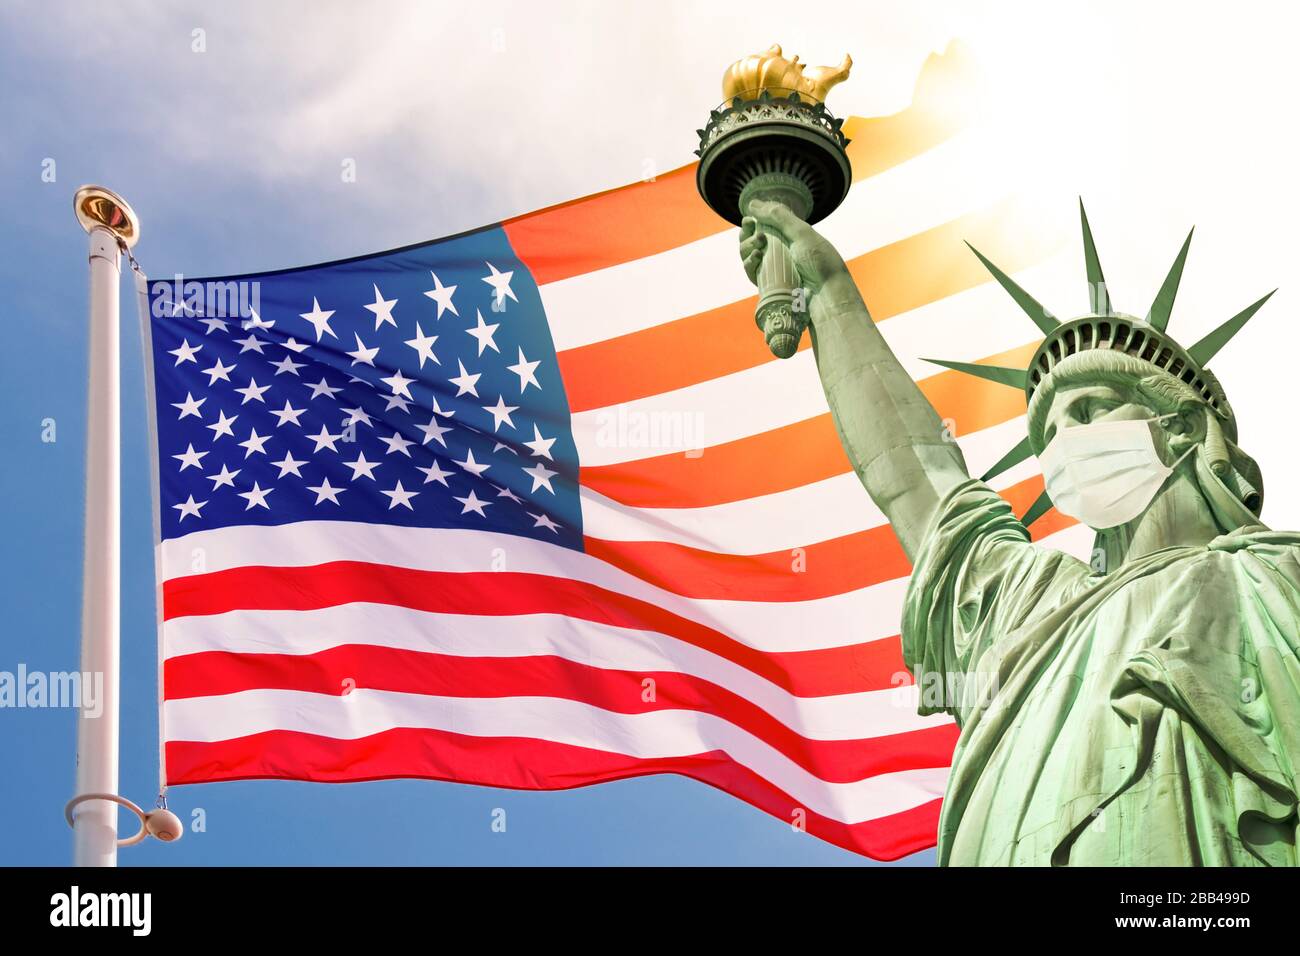 Statue of Liberty wearing a surgical mask, US  american flag background. New coronavirus, covid-19 in New York and USA epidemic crisis concept Stock Photo